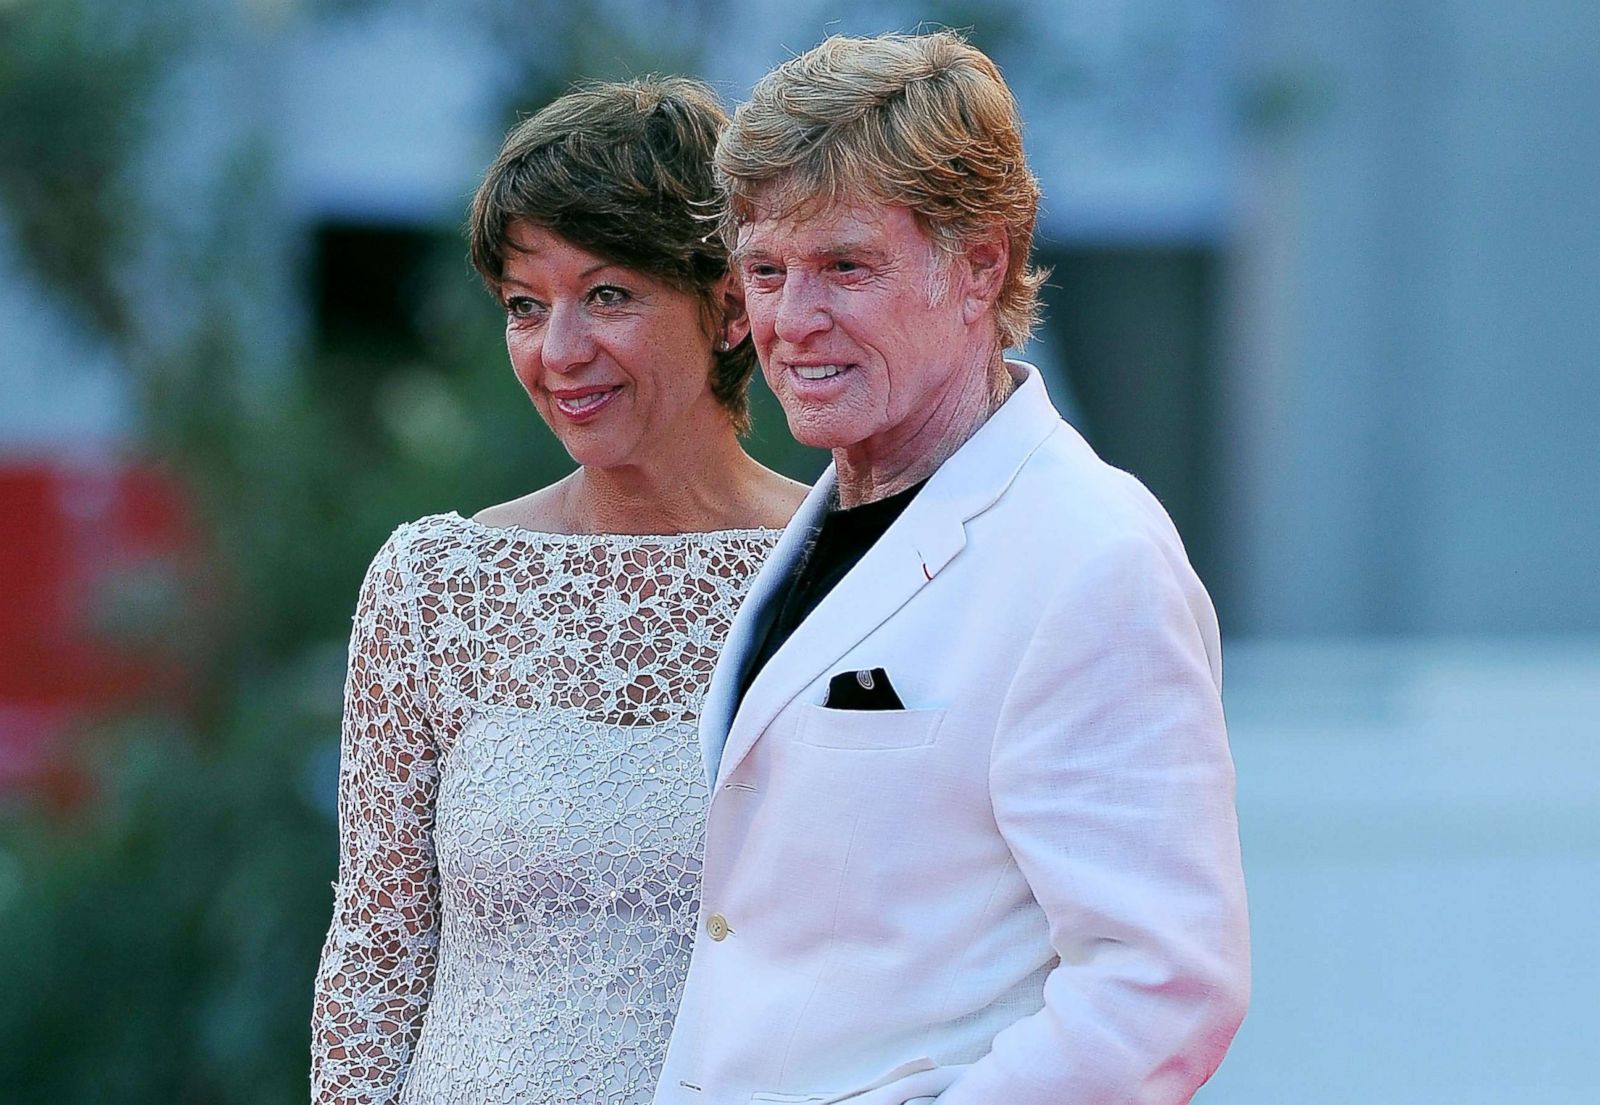 Who Was The Love Of Robert Redford's Life